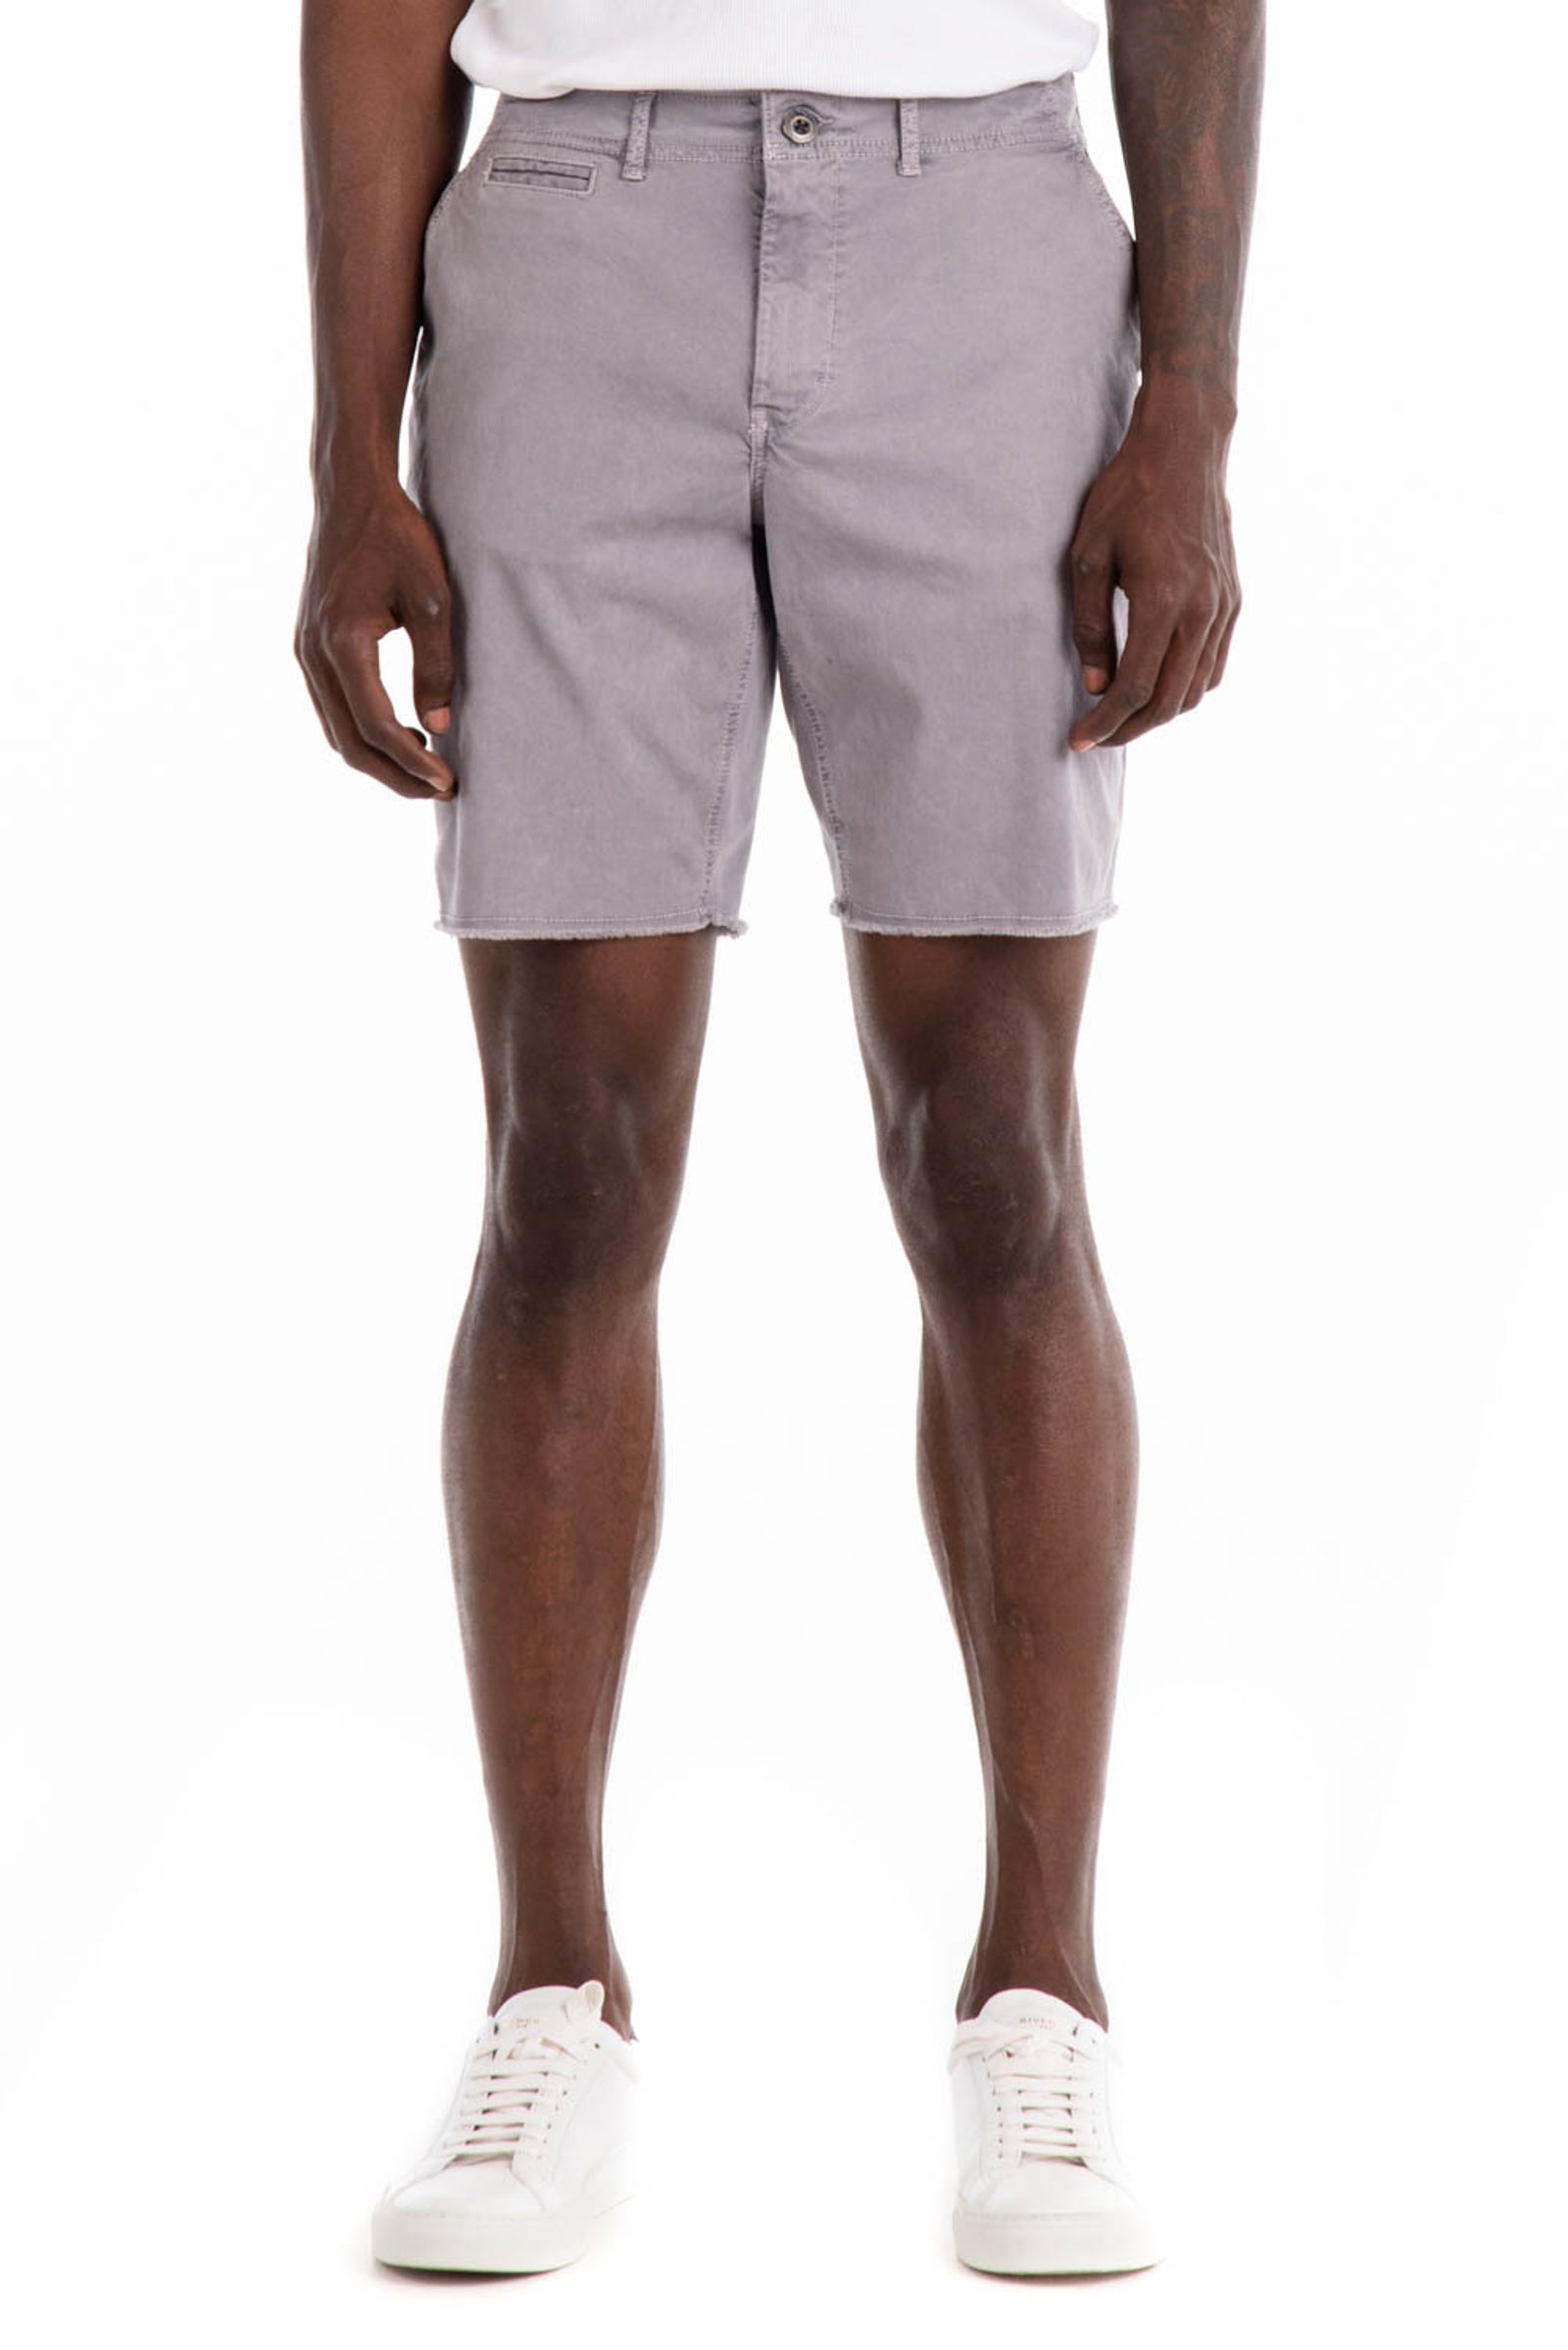 Original Paperbacks Brentwood Chino Short in Light Grey on Model Cropped Front View